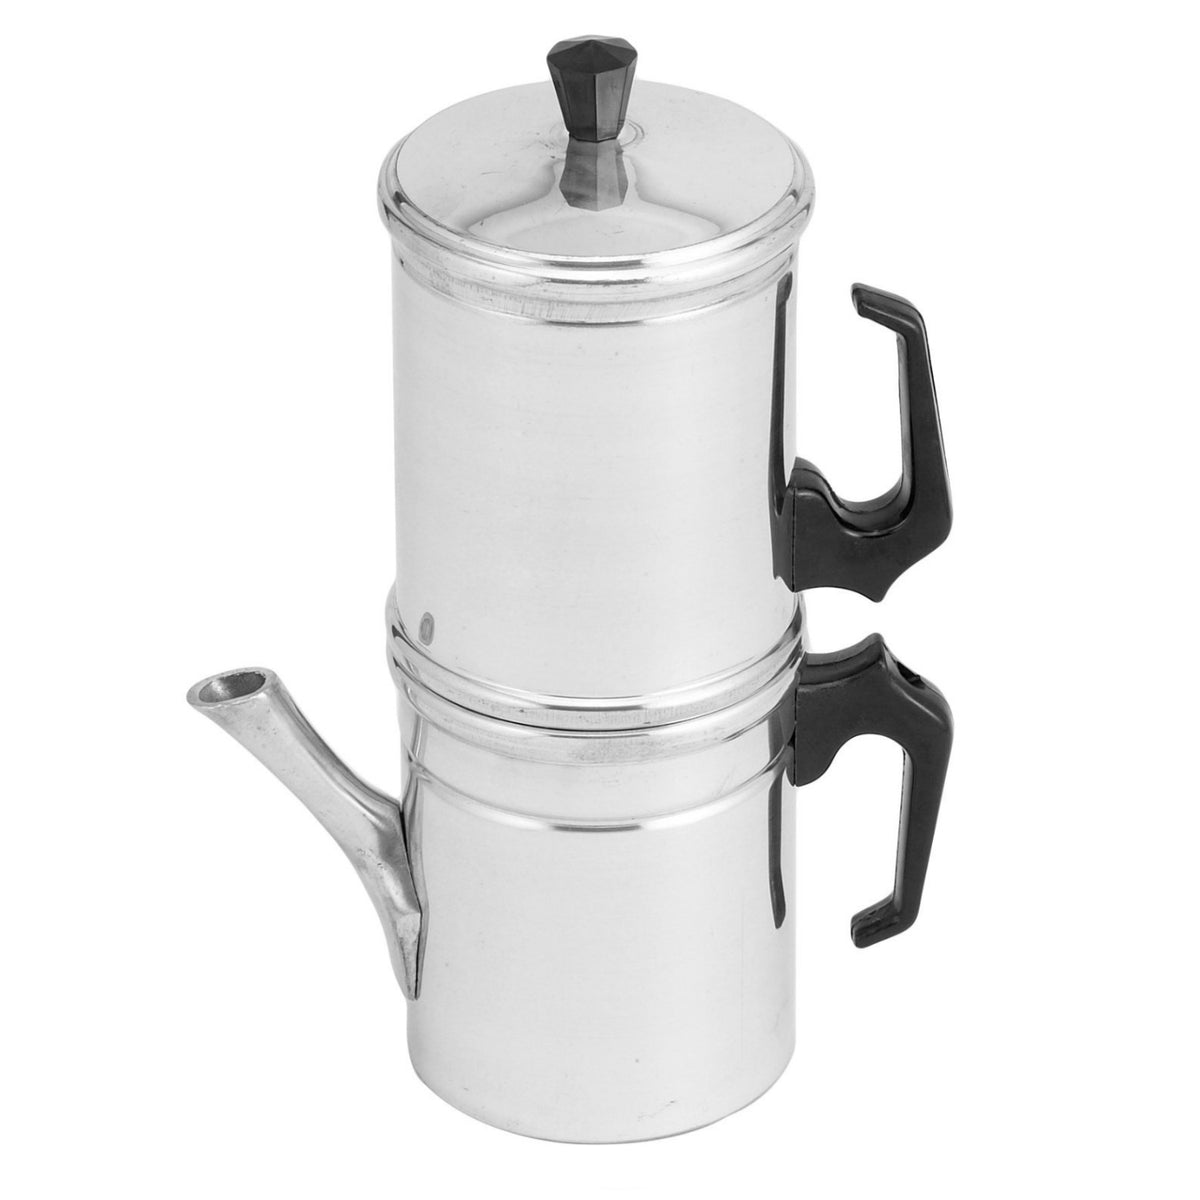 Neapolitan 6 Cup Aluminum Stovetop Coffee Maker, low price, small home ...